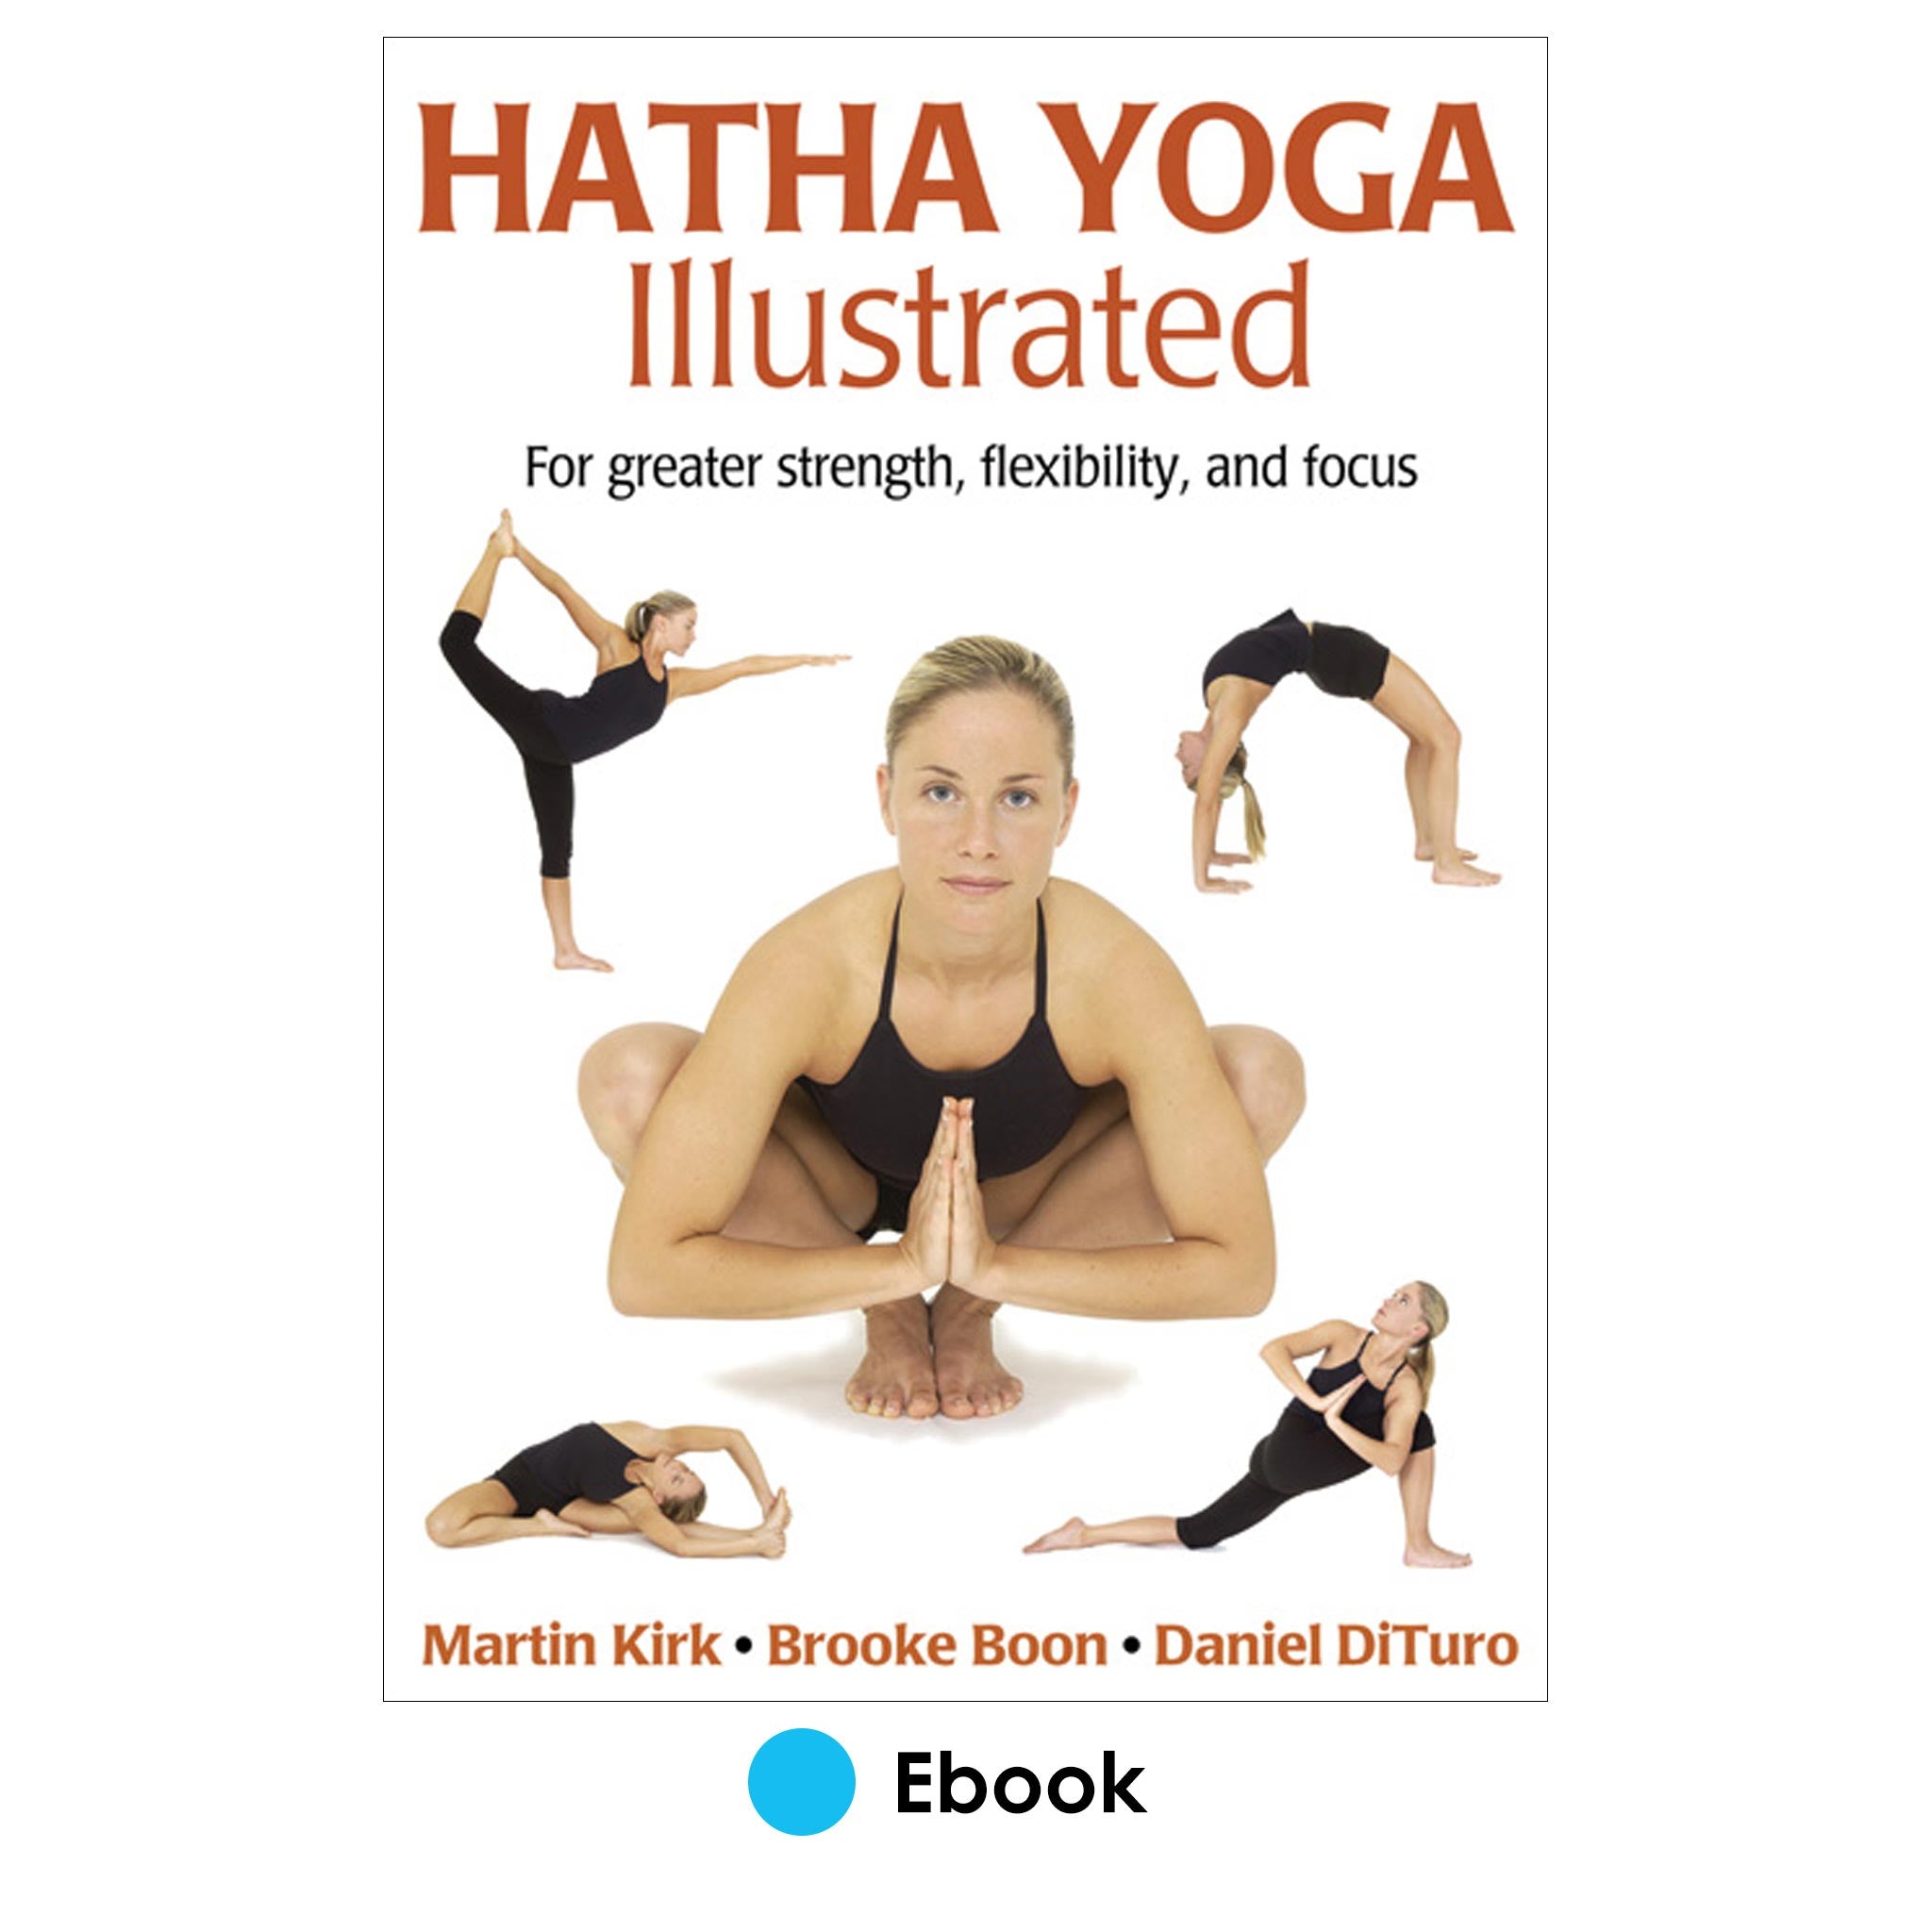 Buy The Anatomy of Yoga Coloring Book: Learn the Form and Biomechanics of  More than 50 Asanas Book Online at Low Prices in India | The Anatomy of Yoga  Coloring Book: Learn